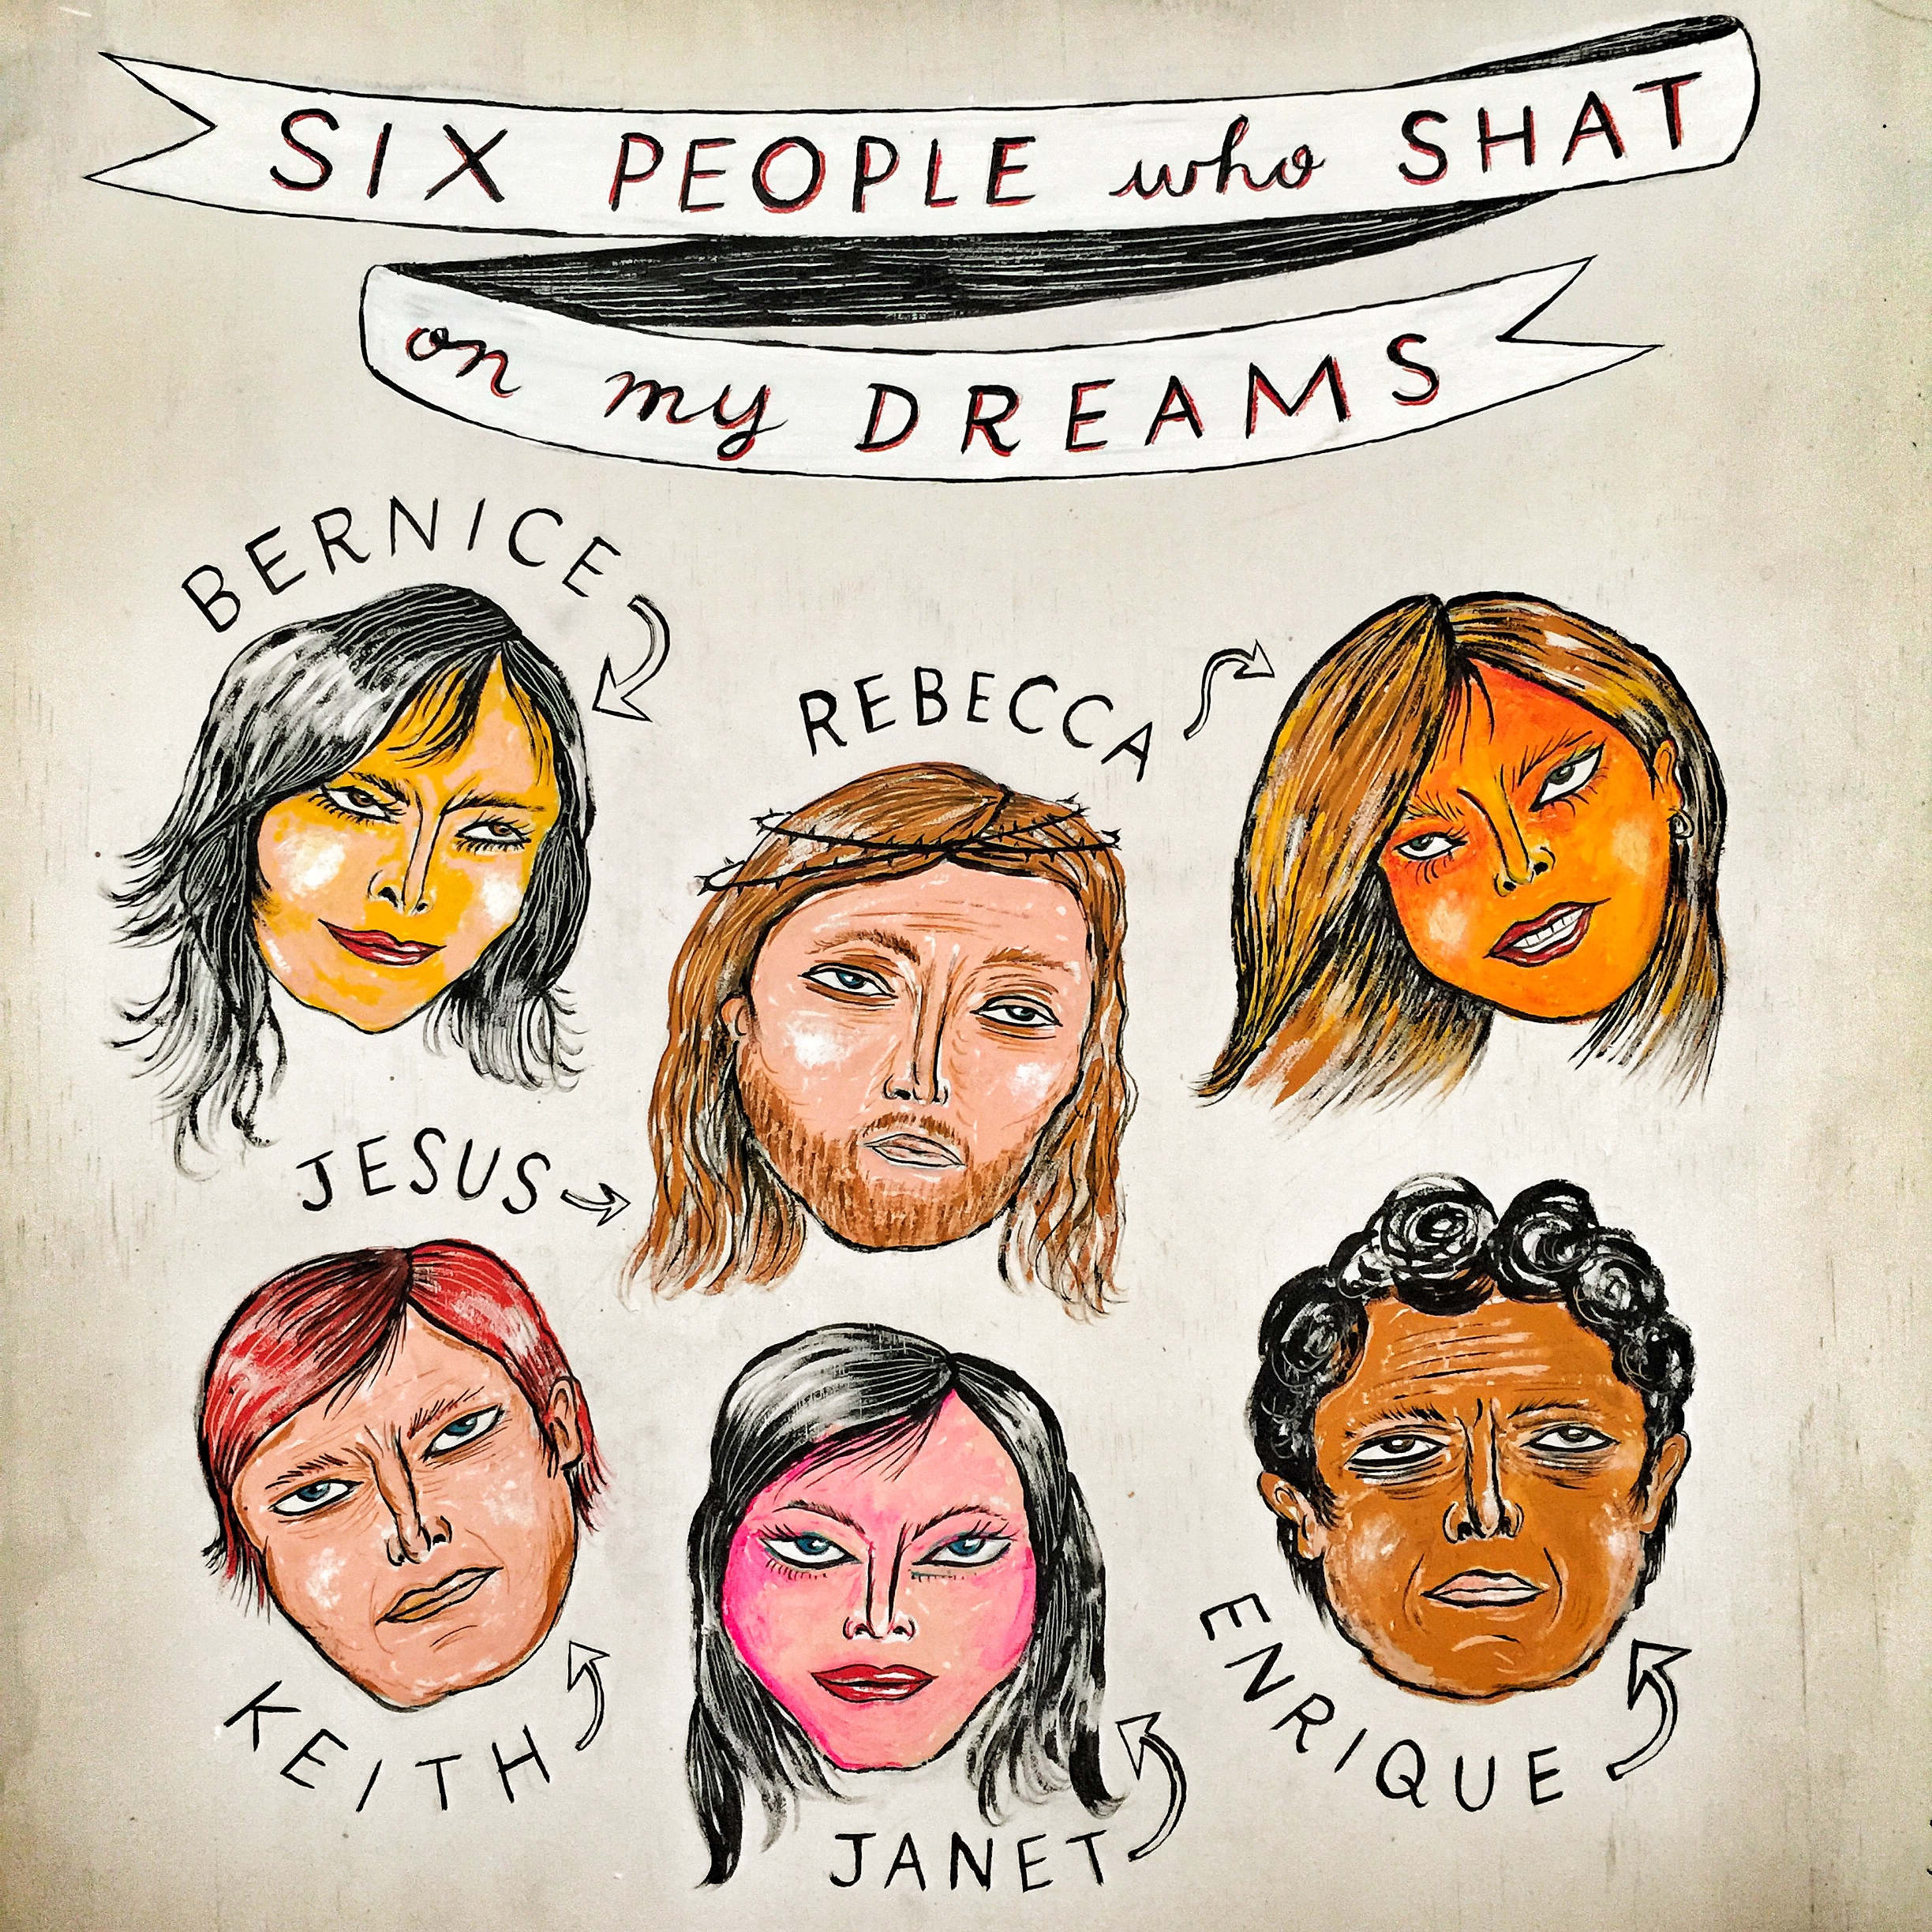 SIX PEOPLE WHO SHAT ON MY DREAMS